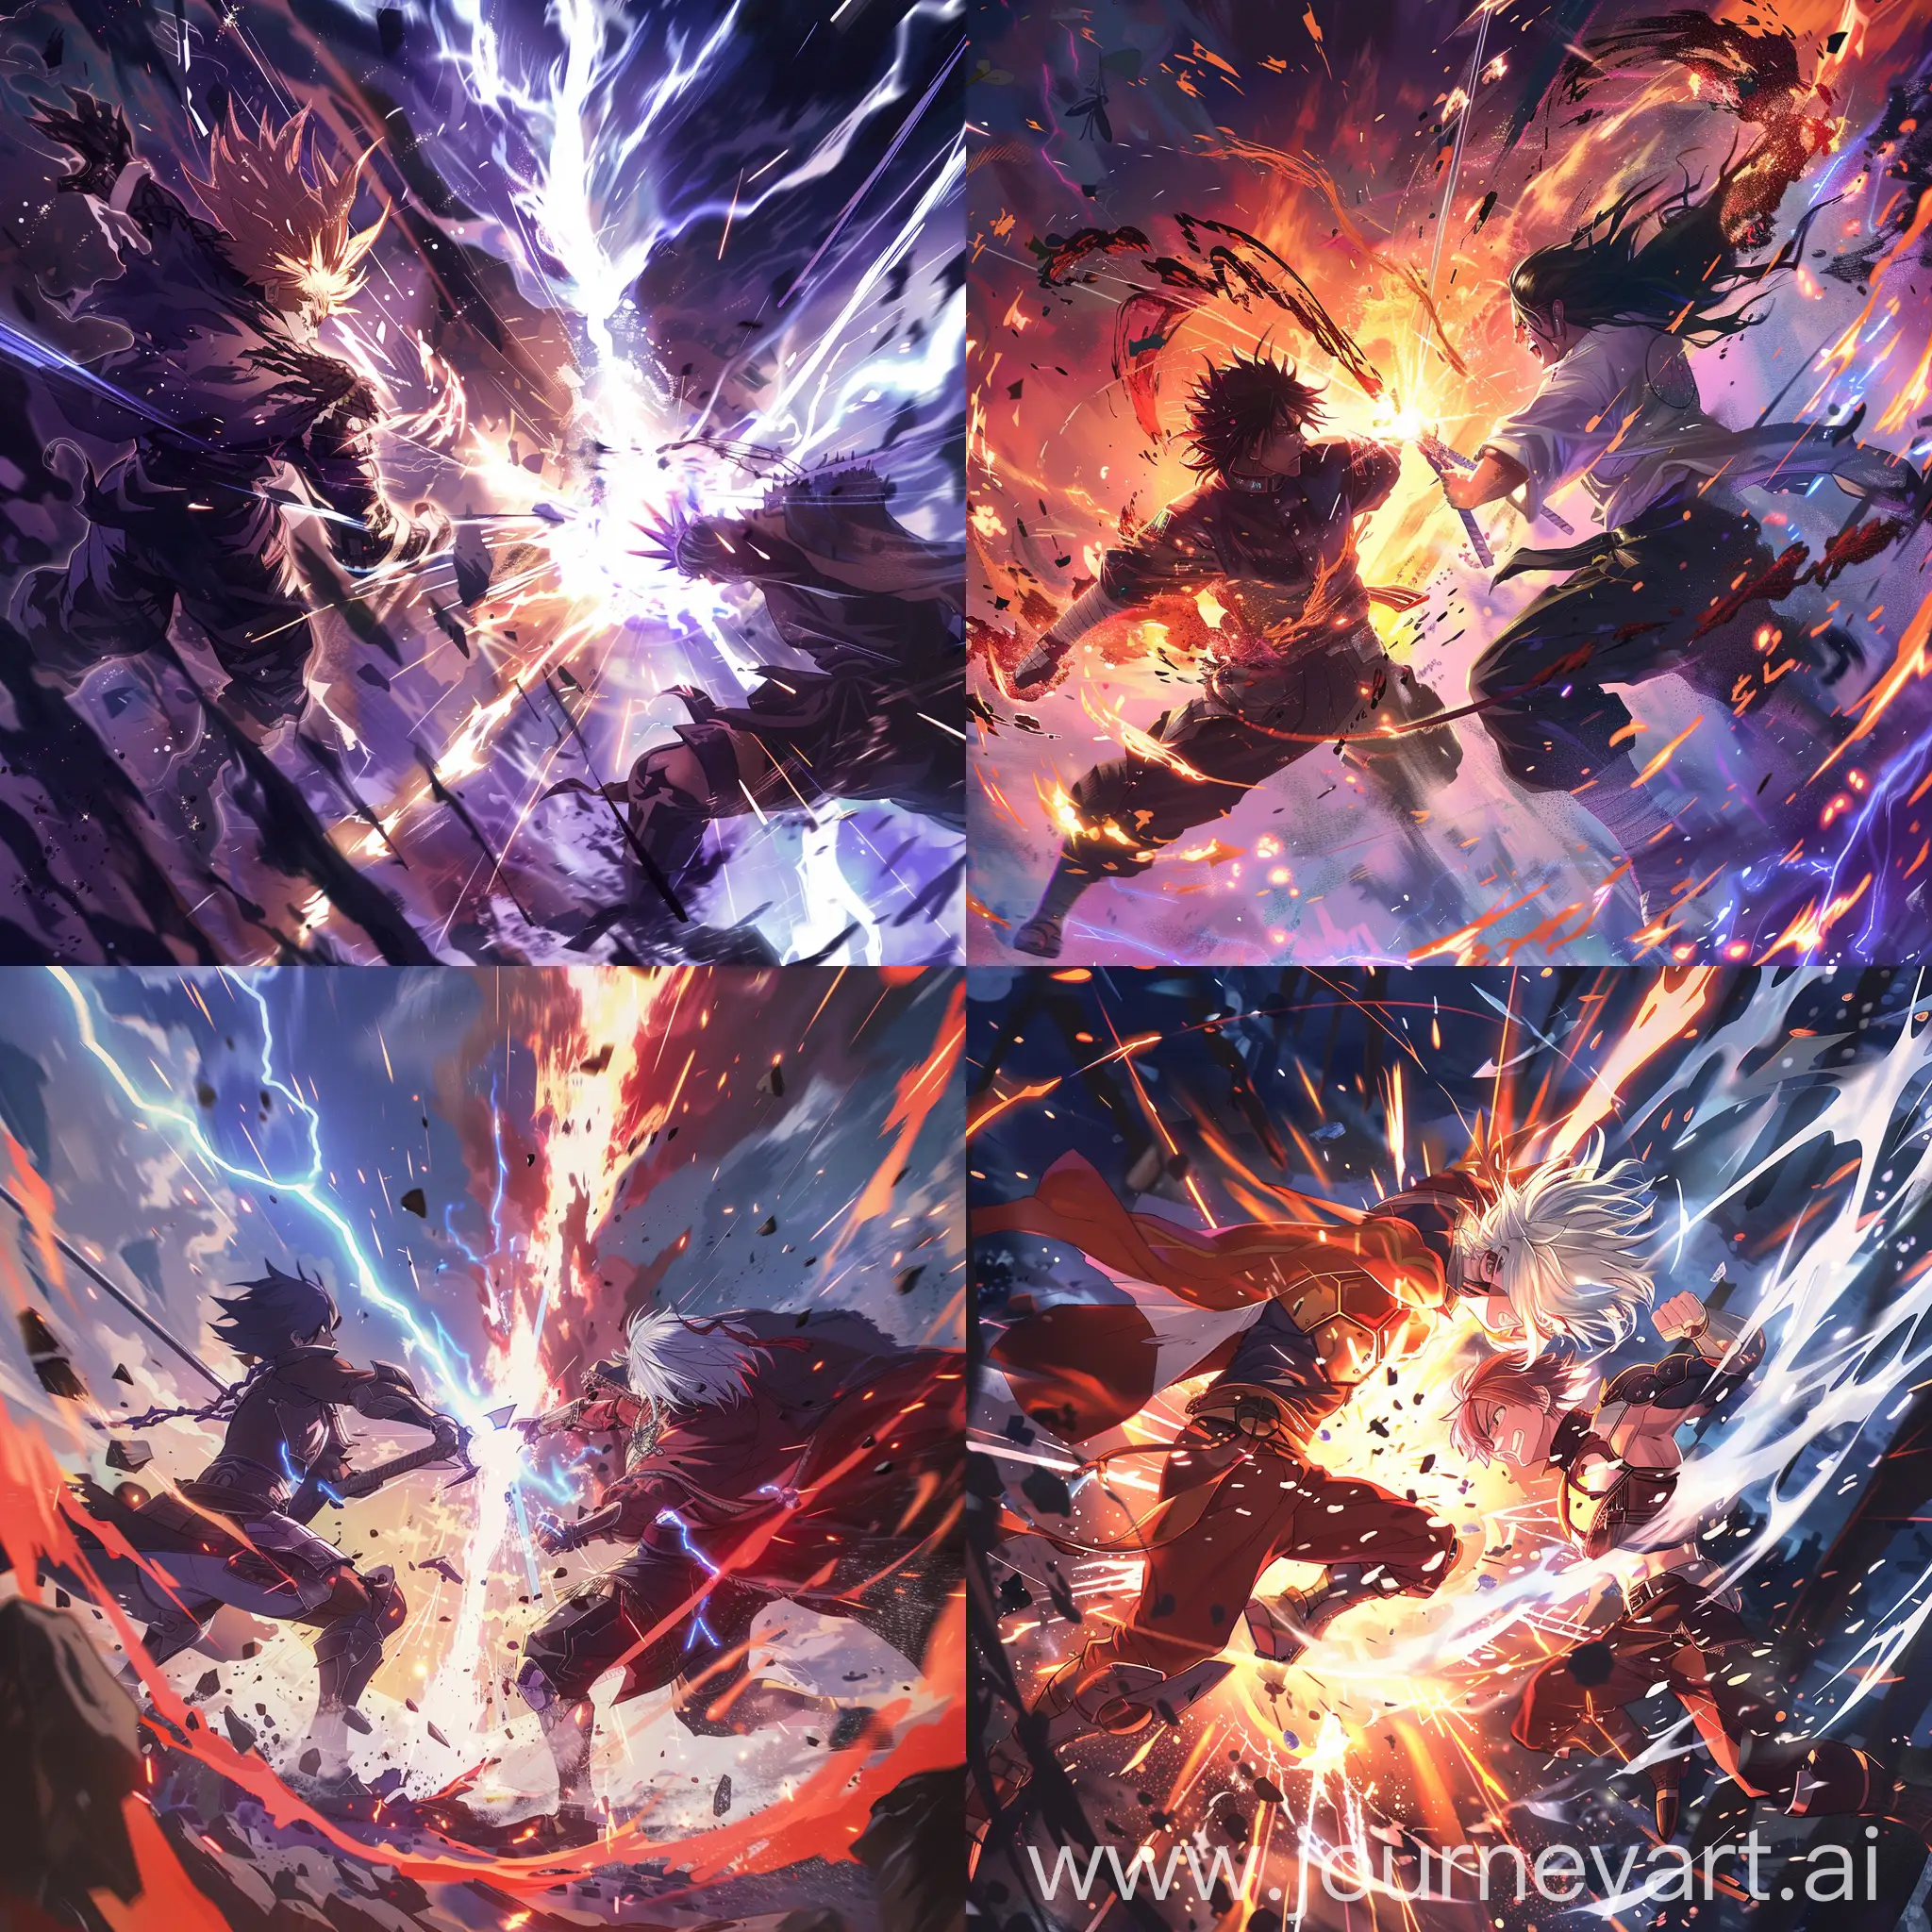 Design  an  intense  anime  art  piece  capturing  a  climactic  battle  between  two  powerful  characters,  with  dynamic  poses  and  impactful  special  effects